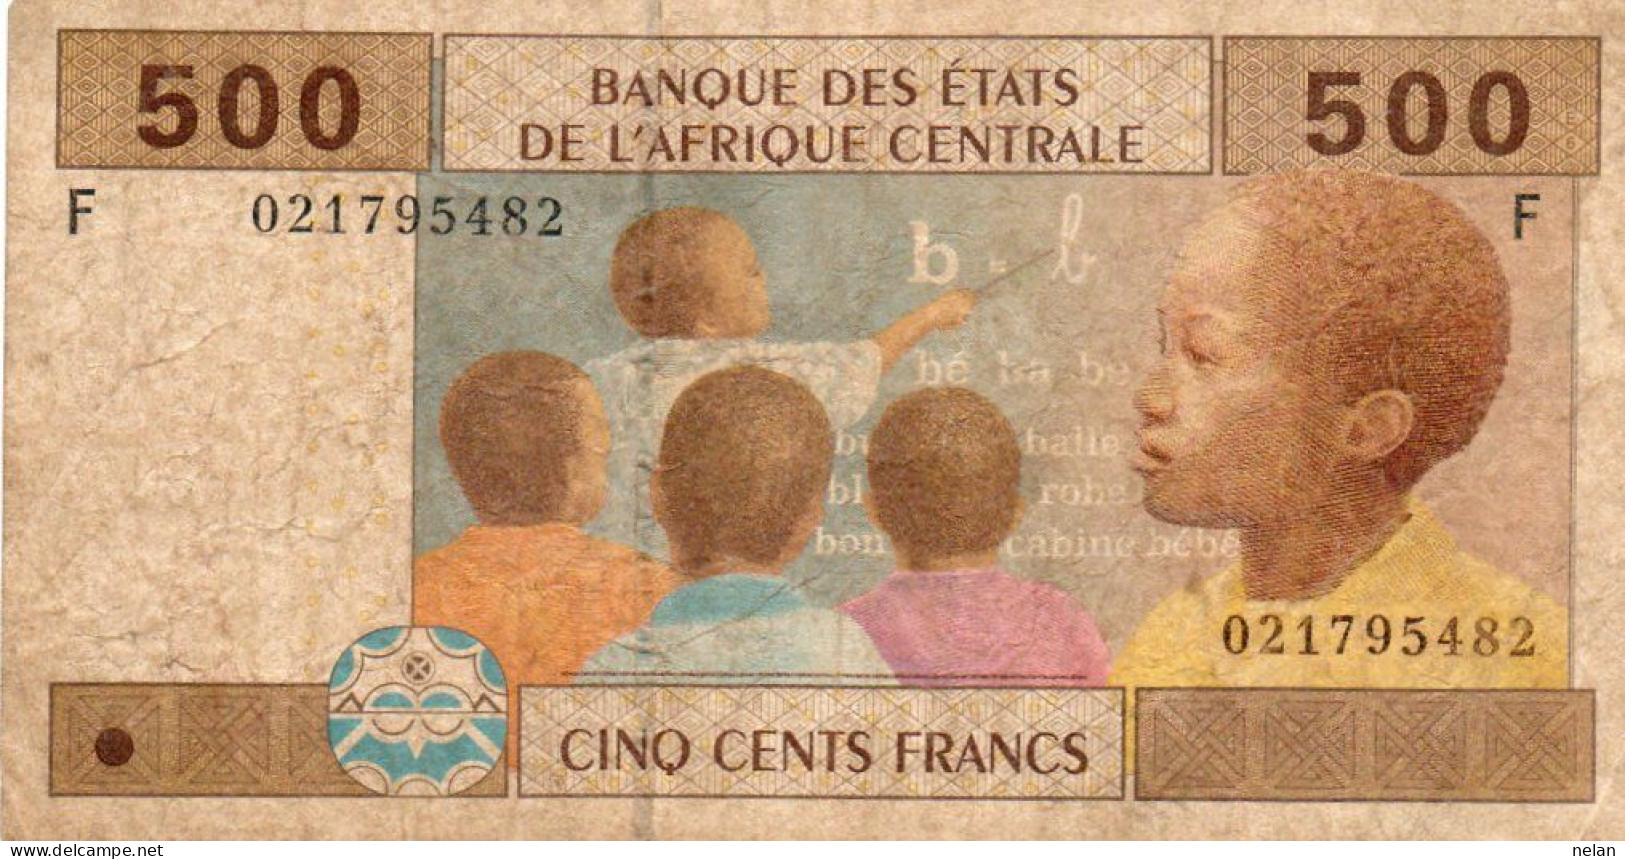 CENTRAL AFRICAN STATES 500 FRANCS 2002 P-506 Fa F For Equatorial Guinea  CIRC. - Zentralafrikanische Staaten